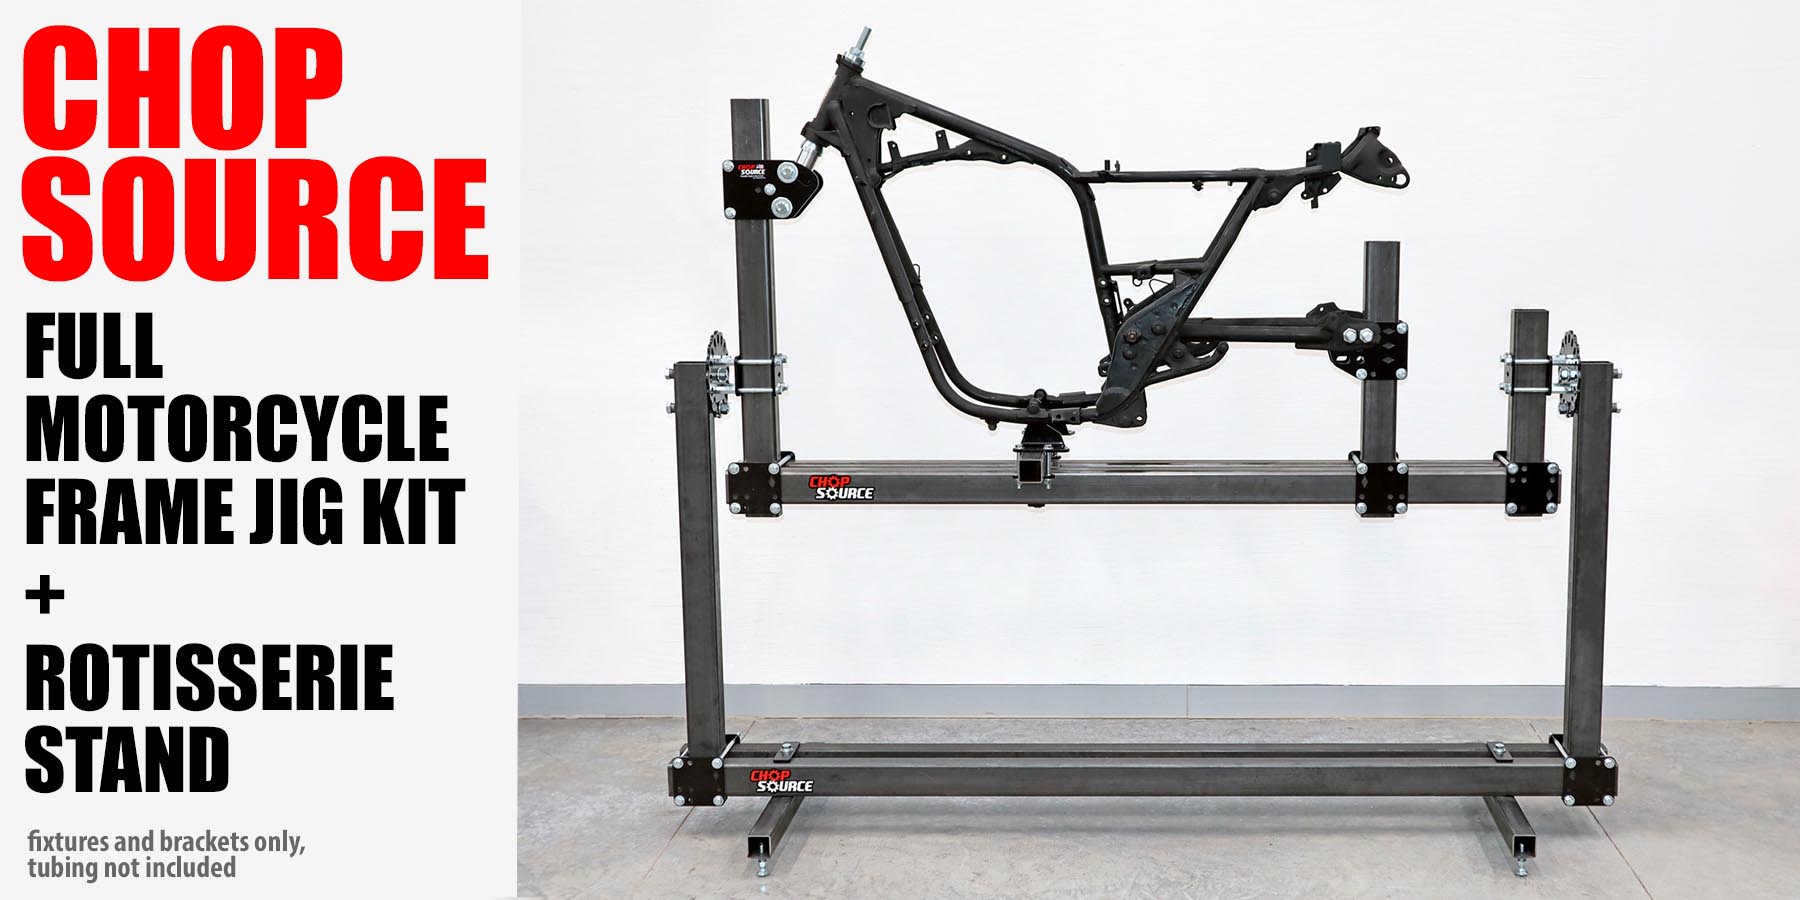 Chop Source Motorcycle Frame Jig with Rotisserie Stand